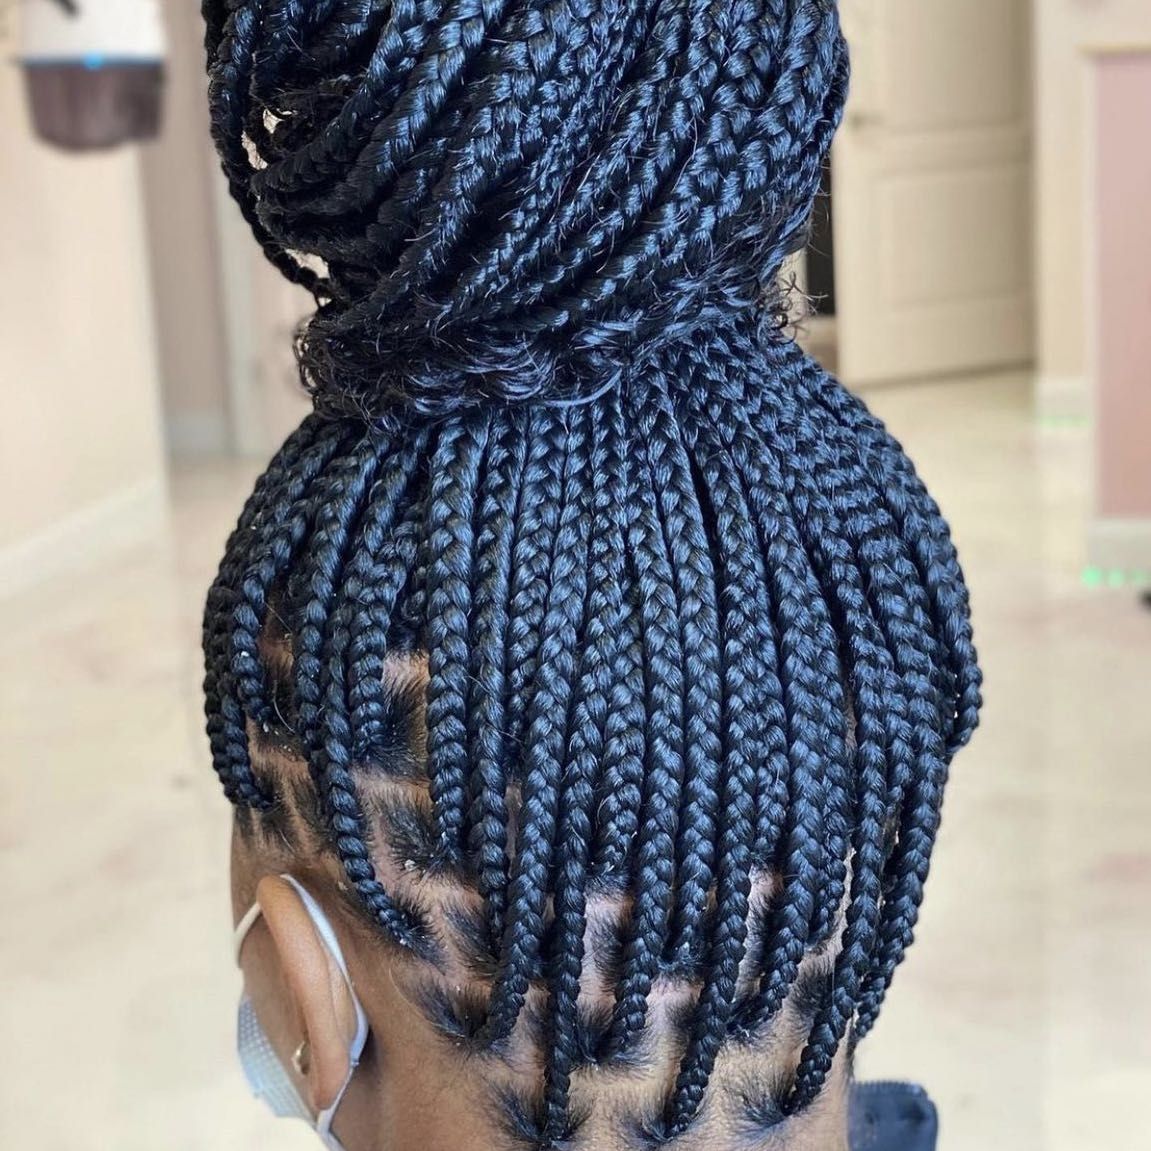 Fatima's Braids and Extensions - Minneapolis - Book Online - Prices,  Reviews, Photos